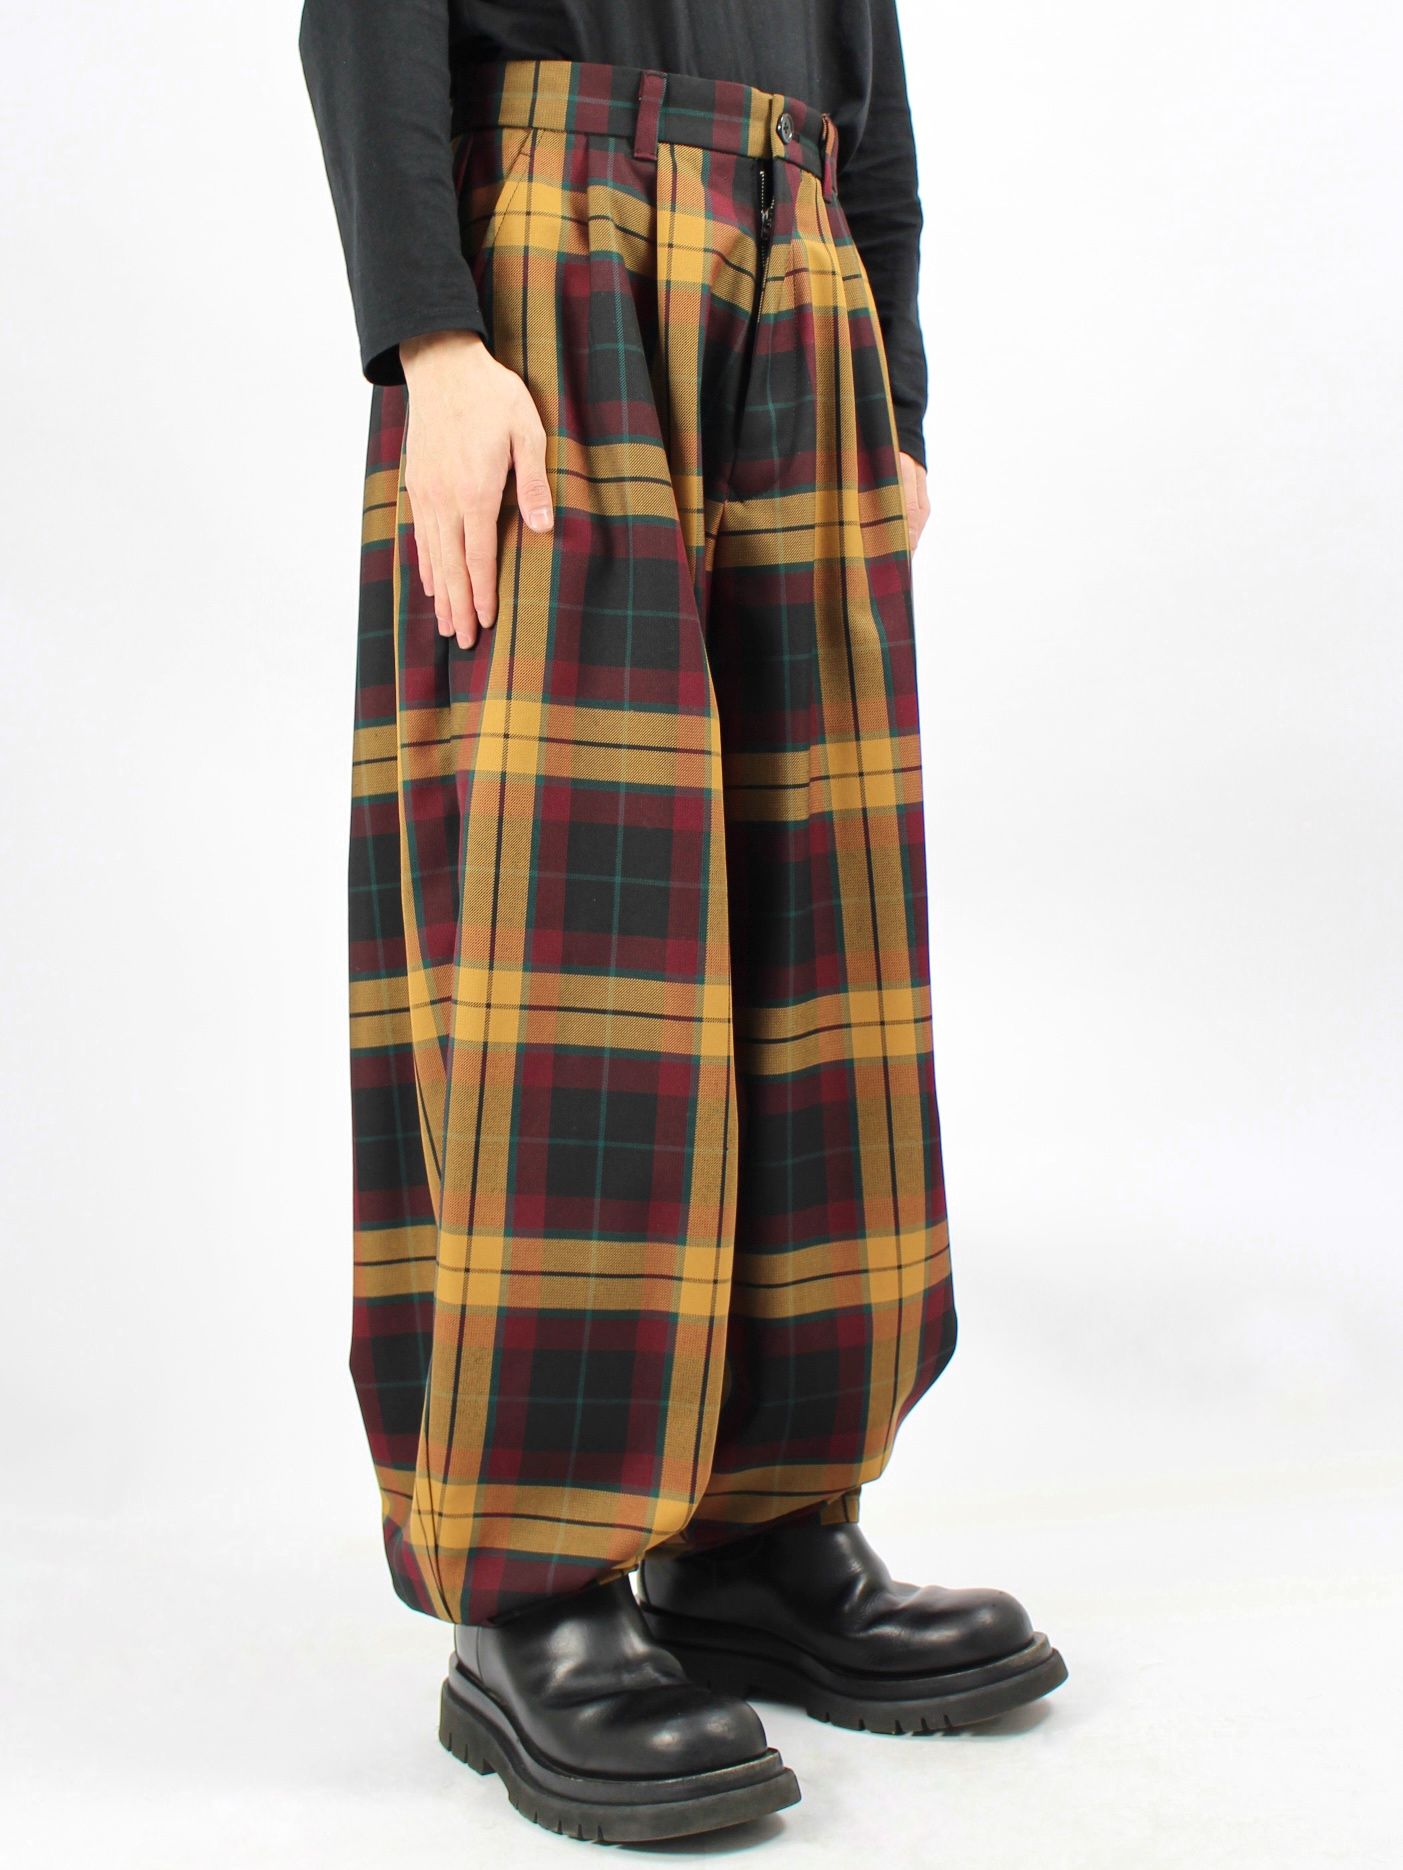 KIDILL - 【22SS】2タック チェックワイド パンツ / Two Tuck Wide Pants / レッド × オレンジ | STORY